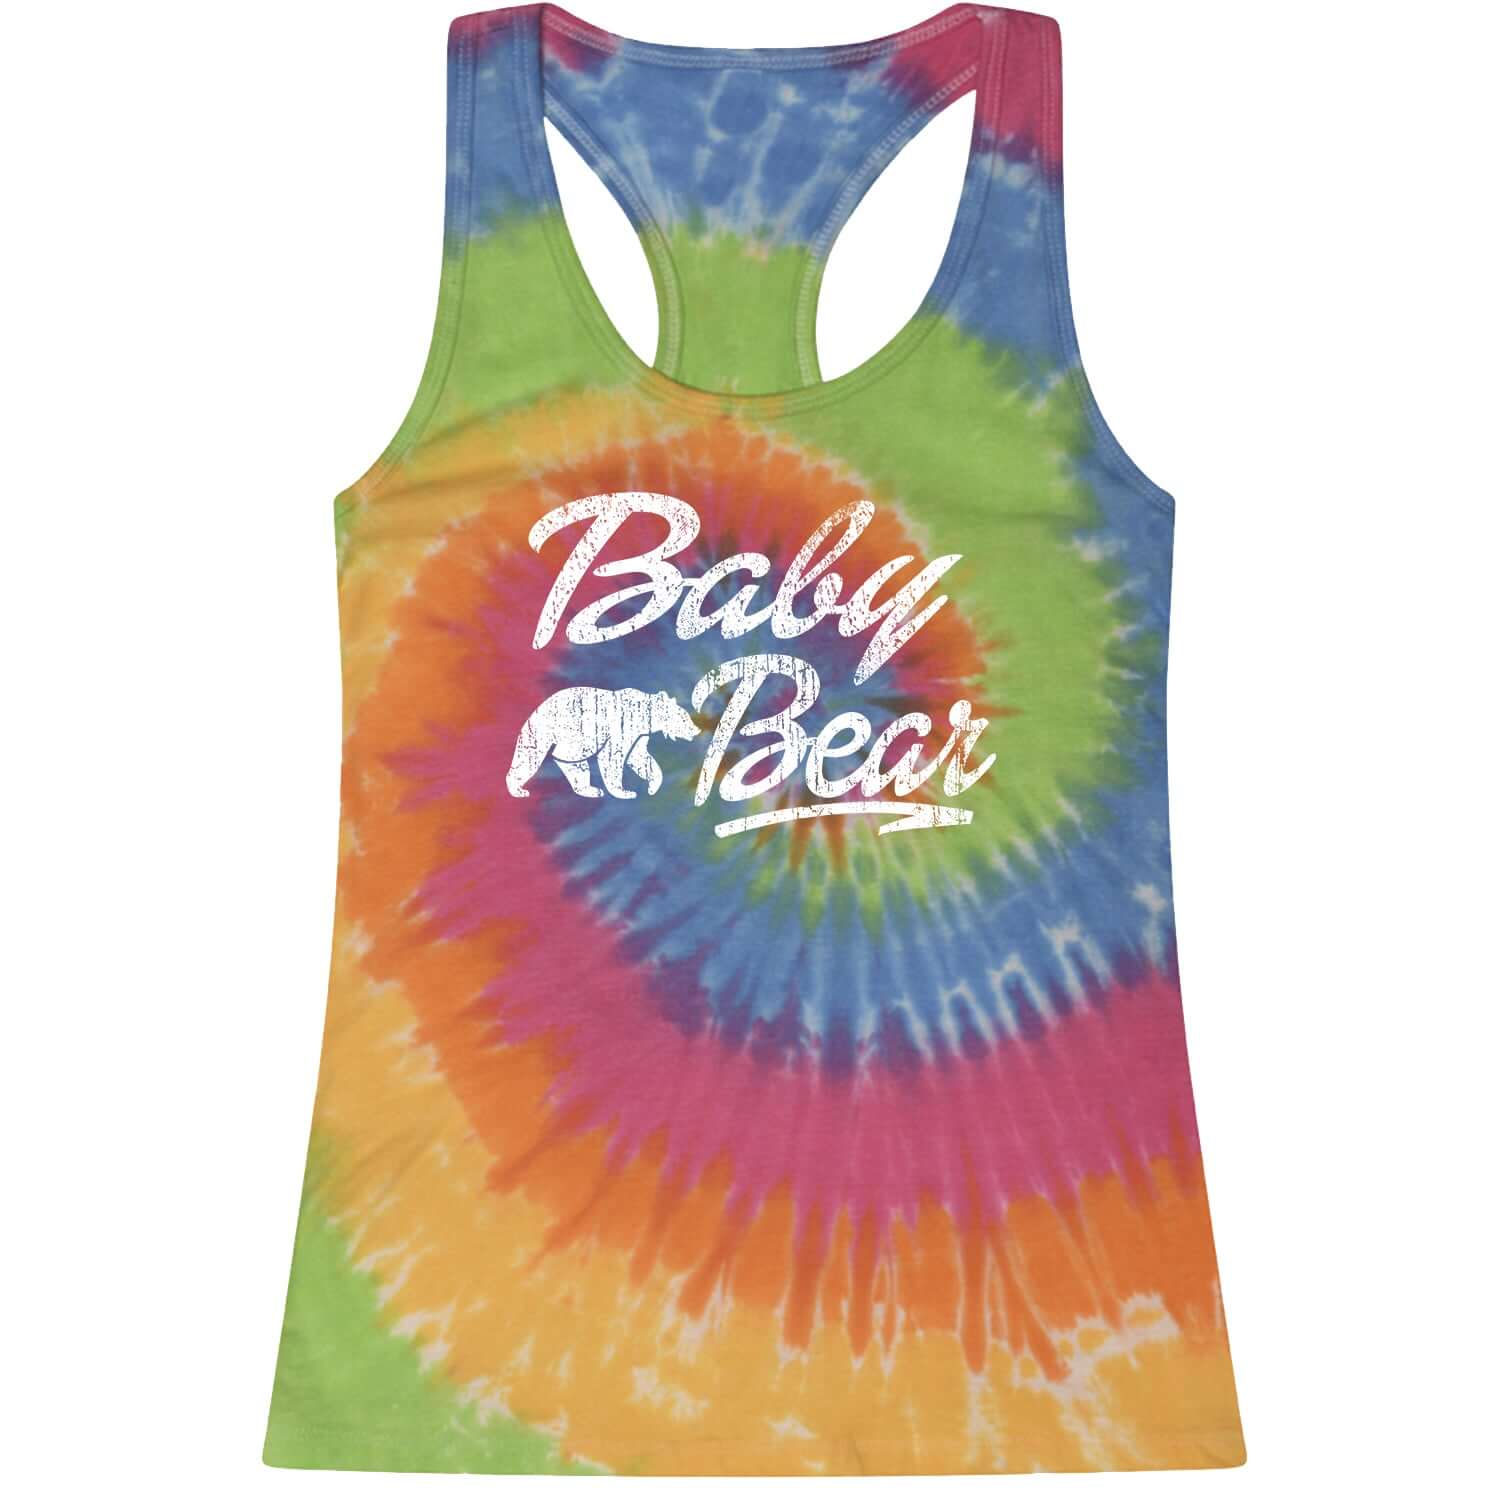 Baby Bear Cub Racerback Tank Top for Women bear, cub, family, matching, shirts, tribe by Expression Tees